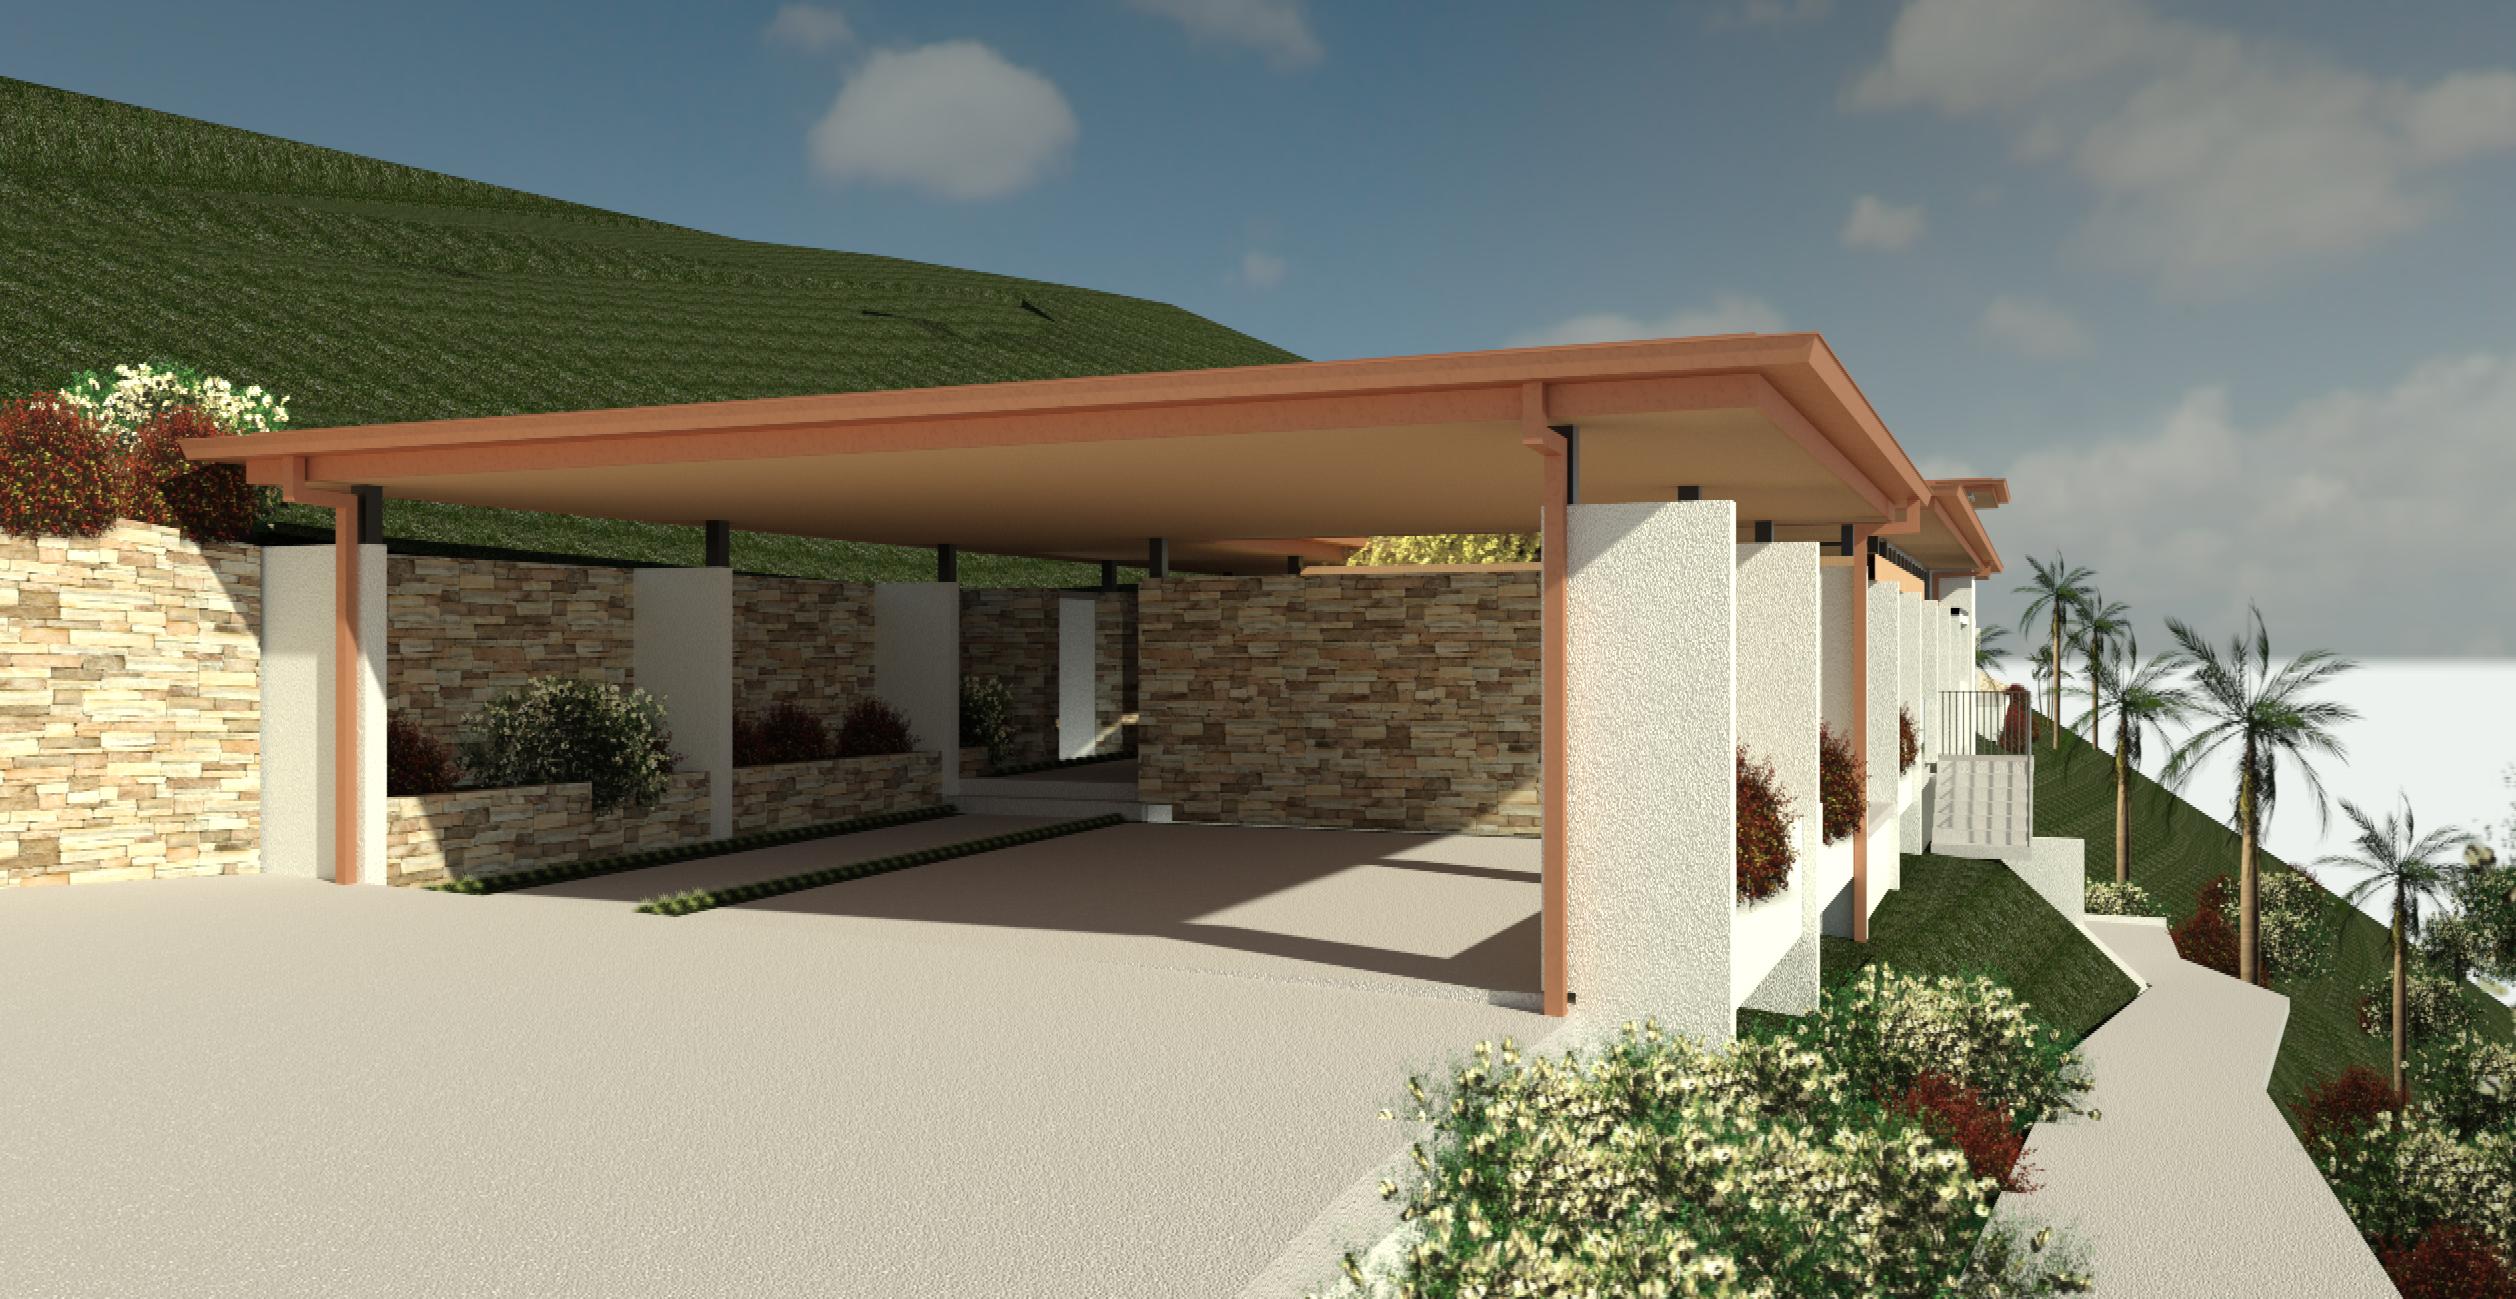 4 bed house with carport